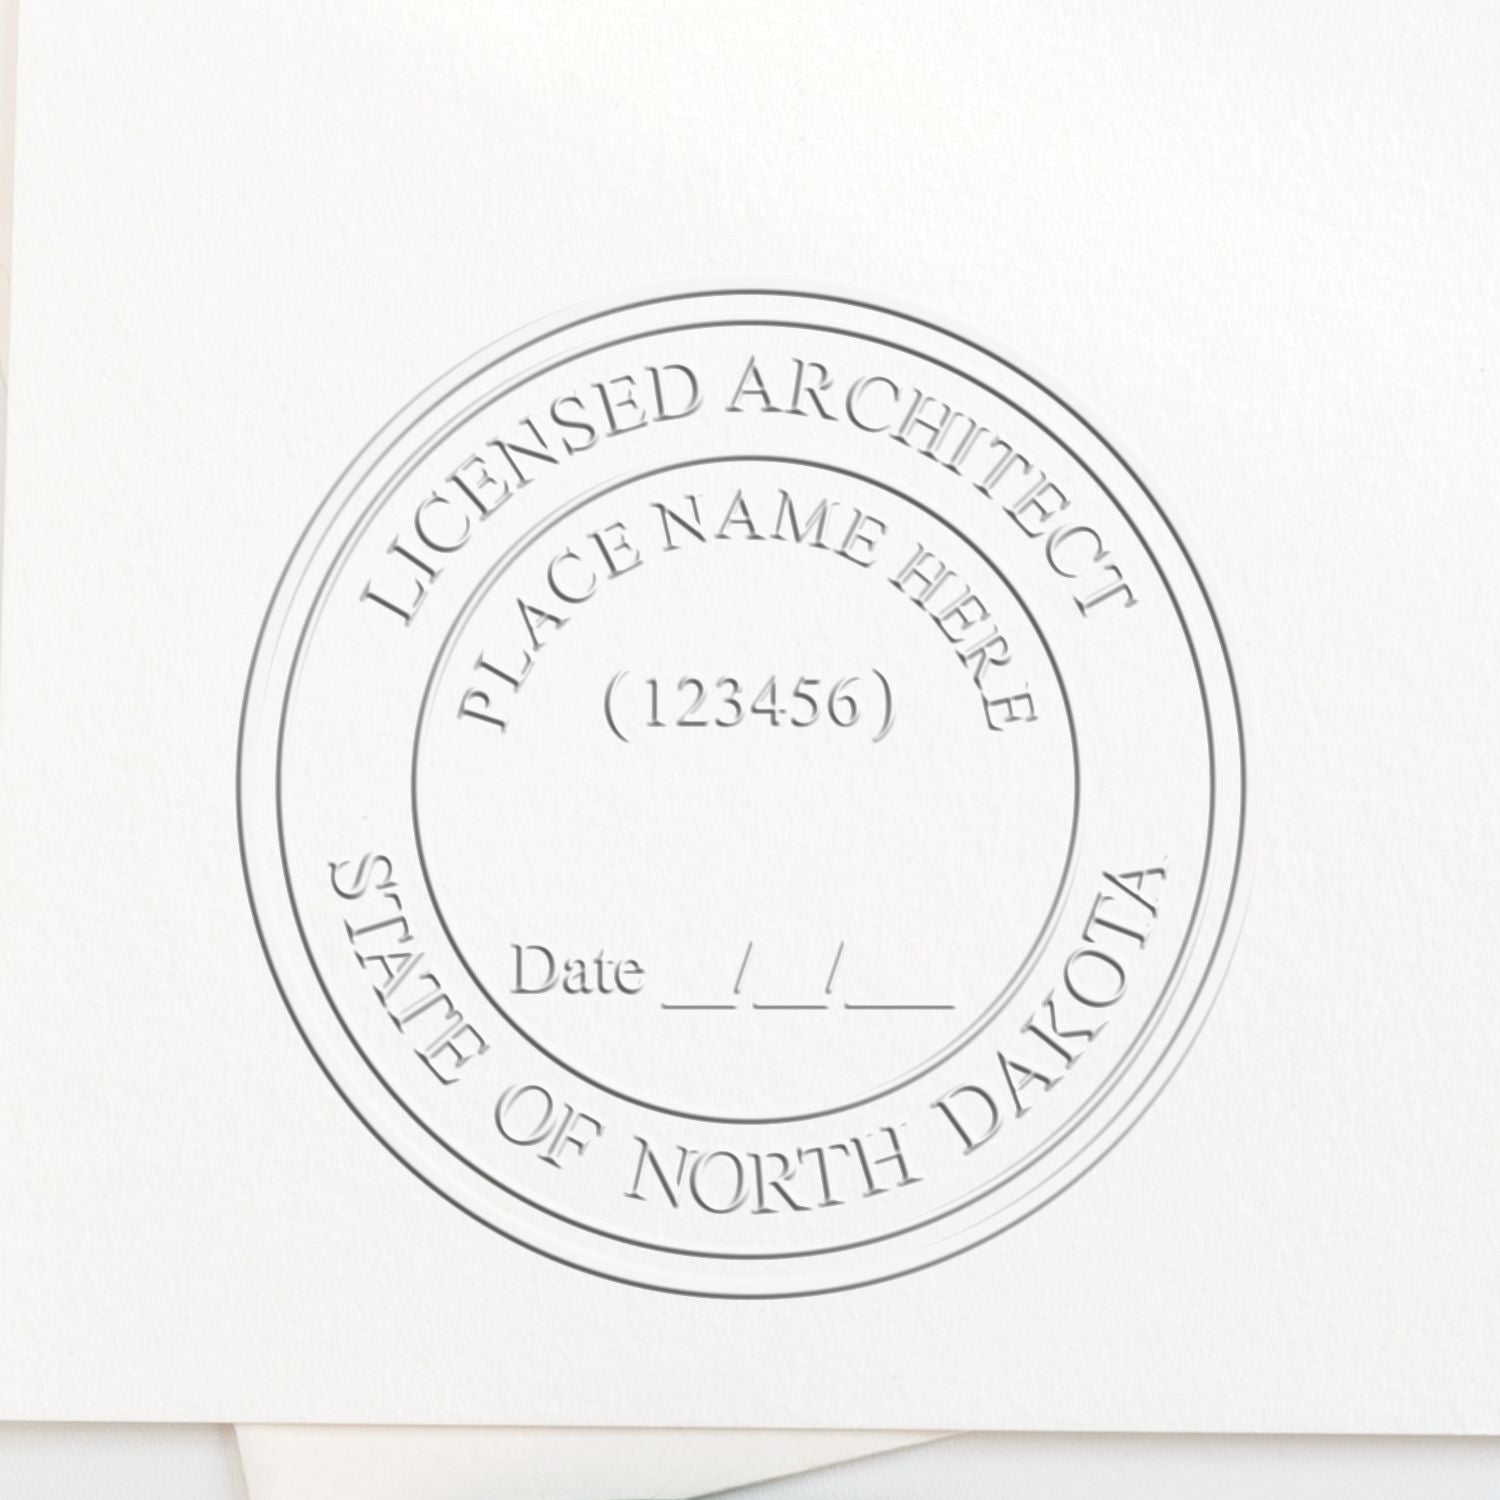 An alternative view of the State of North Dakota Long Reach Architectural Embossing Seal stamped on a sheet of paper showing the image in use